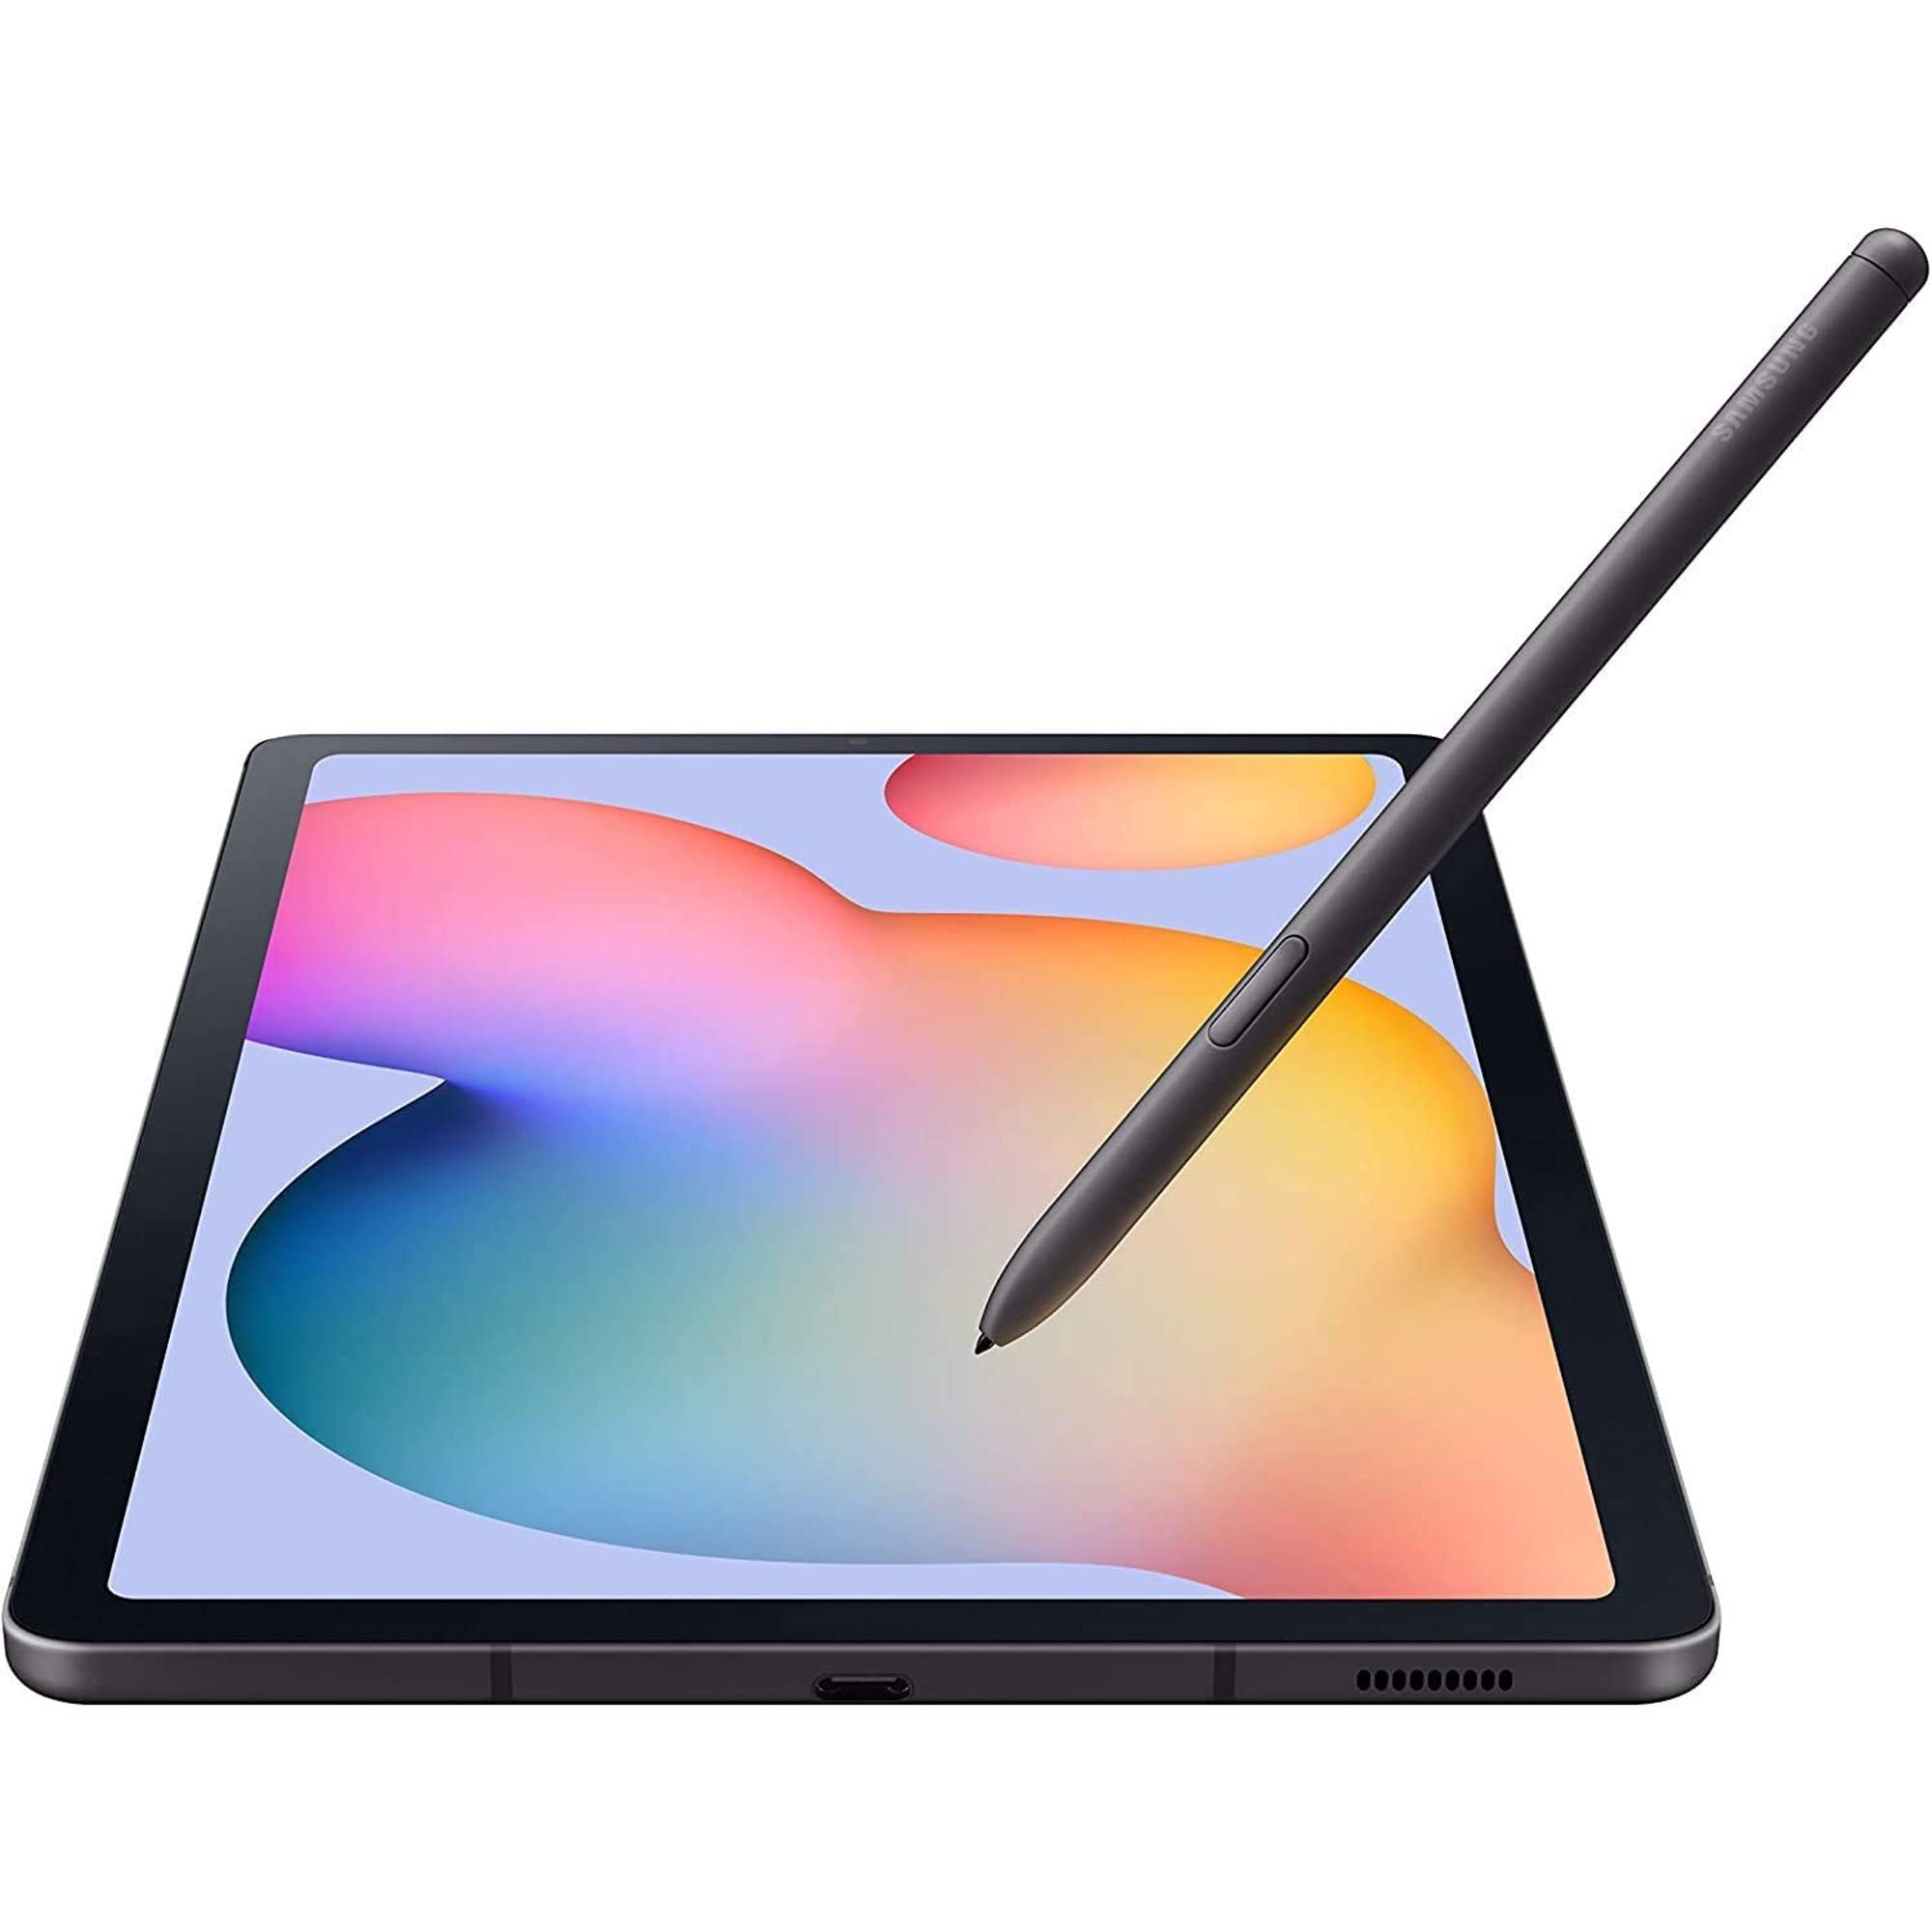 SAMSUNG Galaxy Tab S6 Lite 10.4'' (2000x1200) WiFi Tablet Bundle, 4GB RAM, 64GB Storage, Bluetooth, Android 10, S Pen, Tablet Cover + Accessories